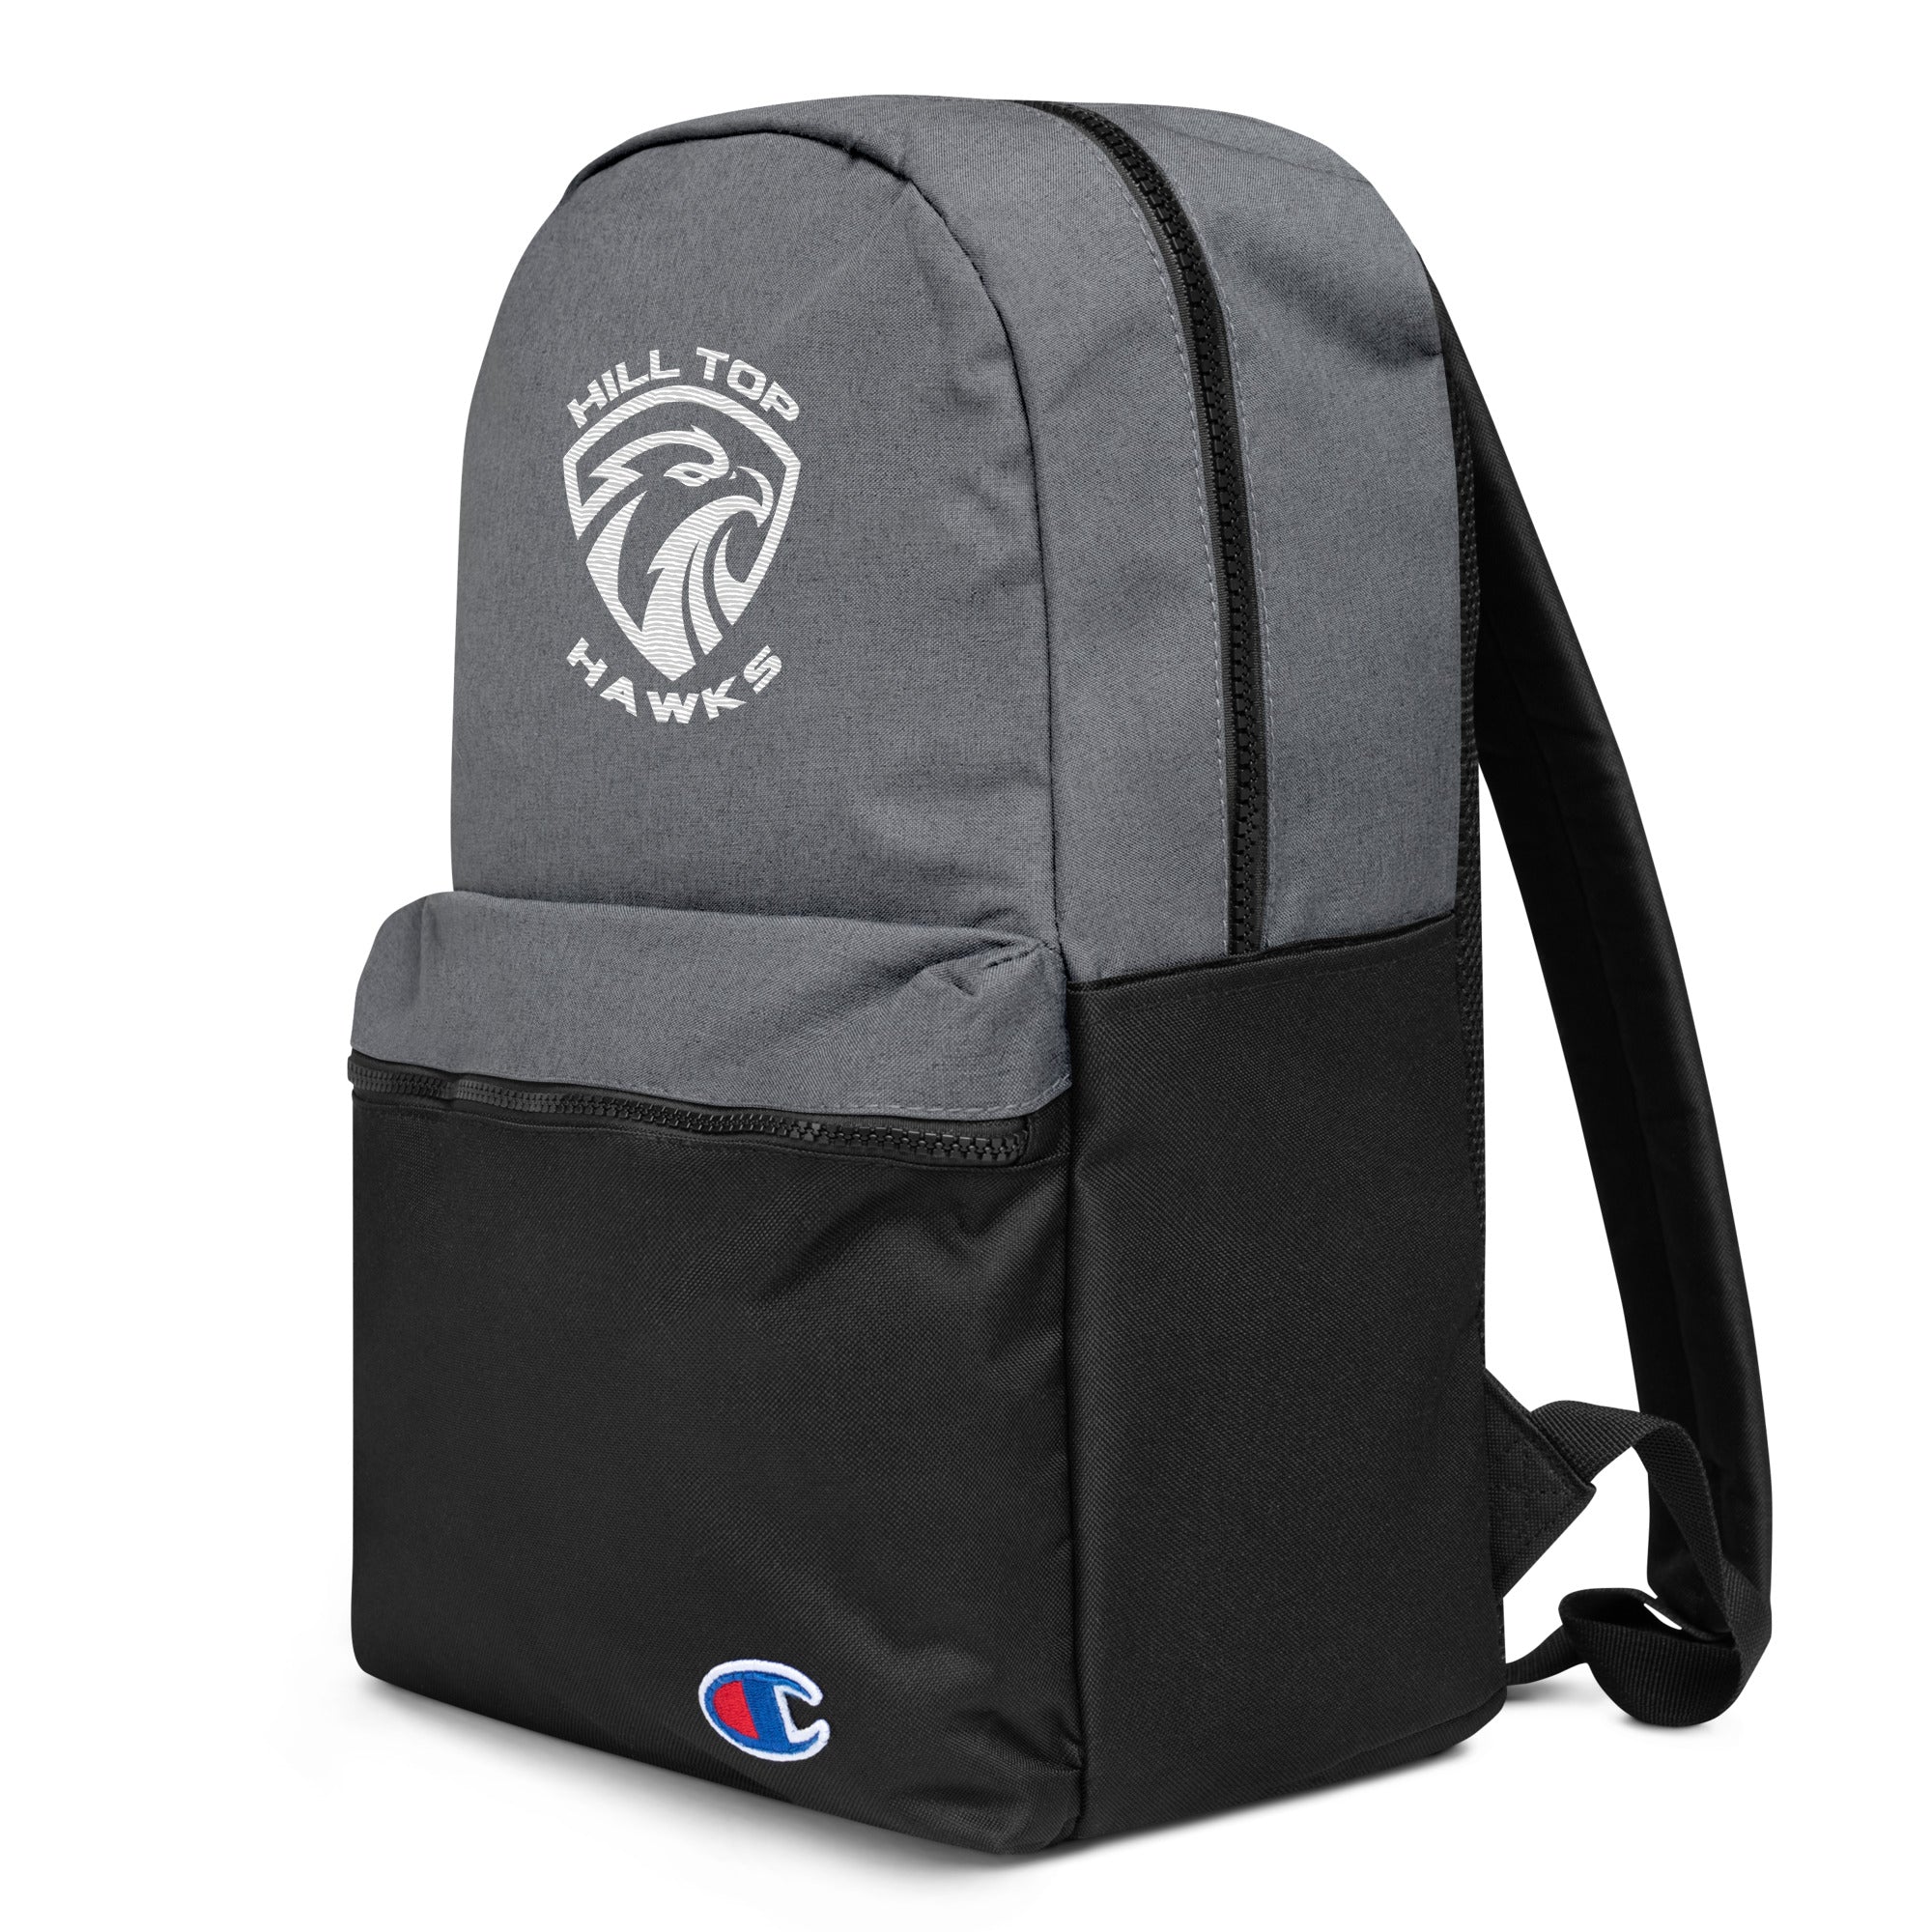 Hill Top Backpack